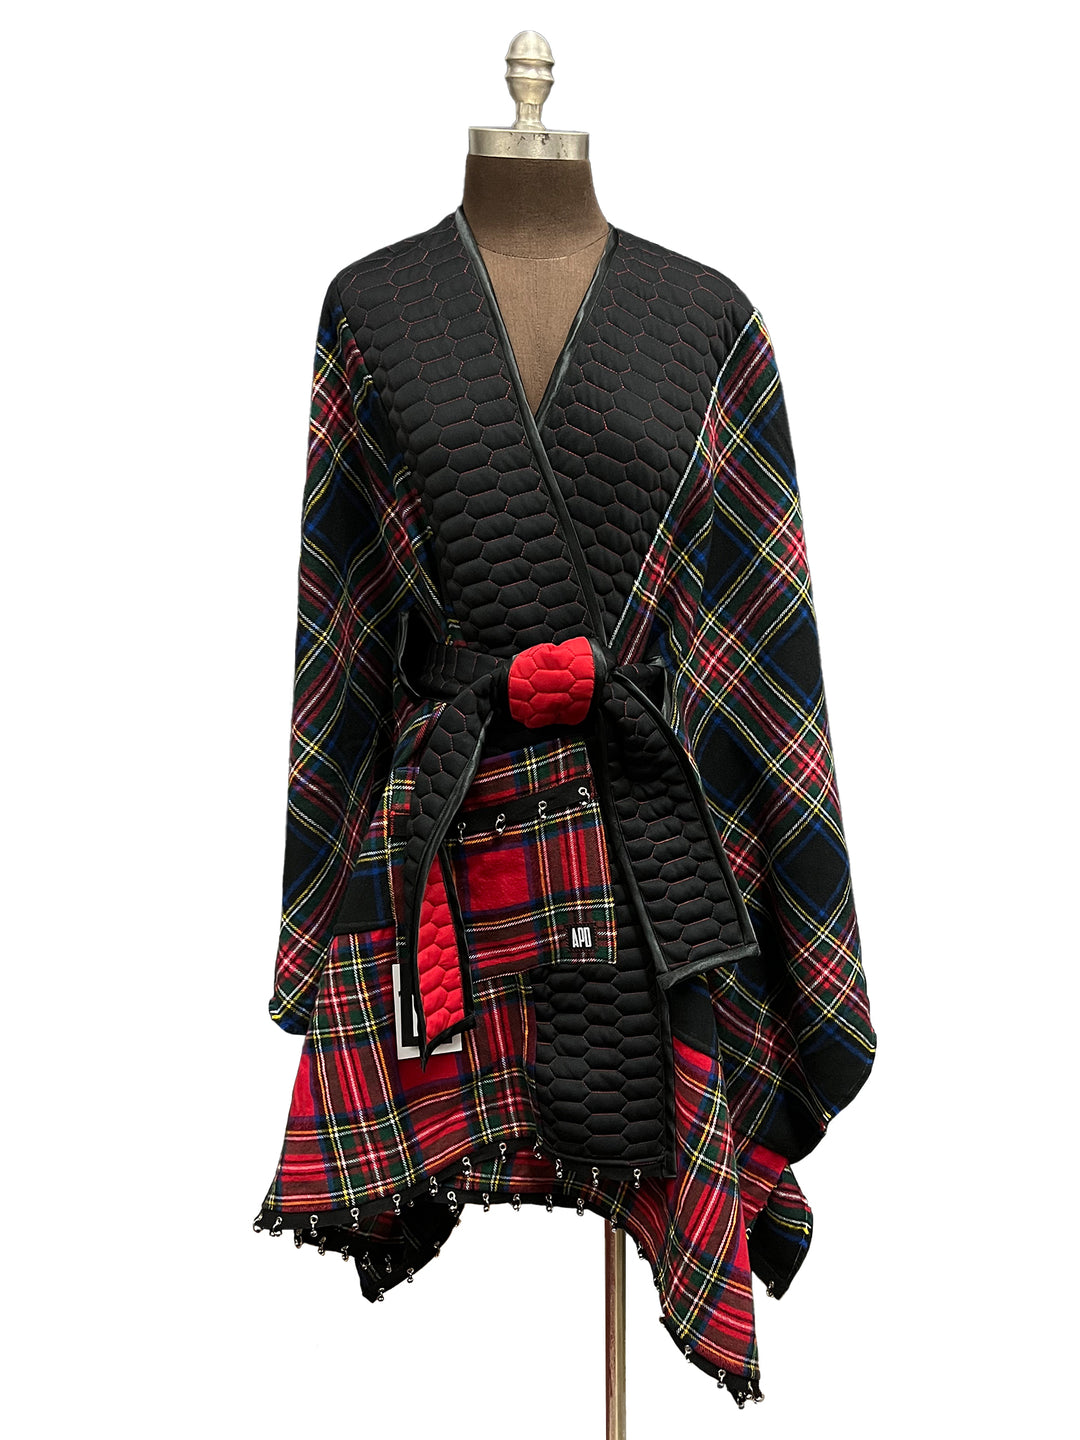 Reversible Belted Kimono Wrap in Honeycomb Quilt and Plaid Flannel